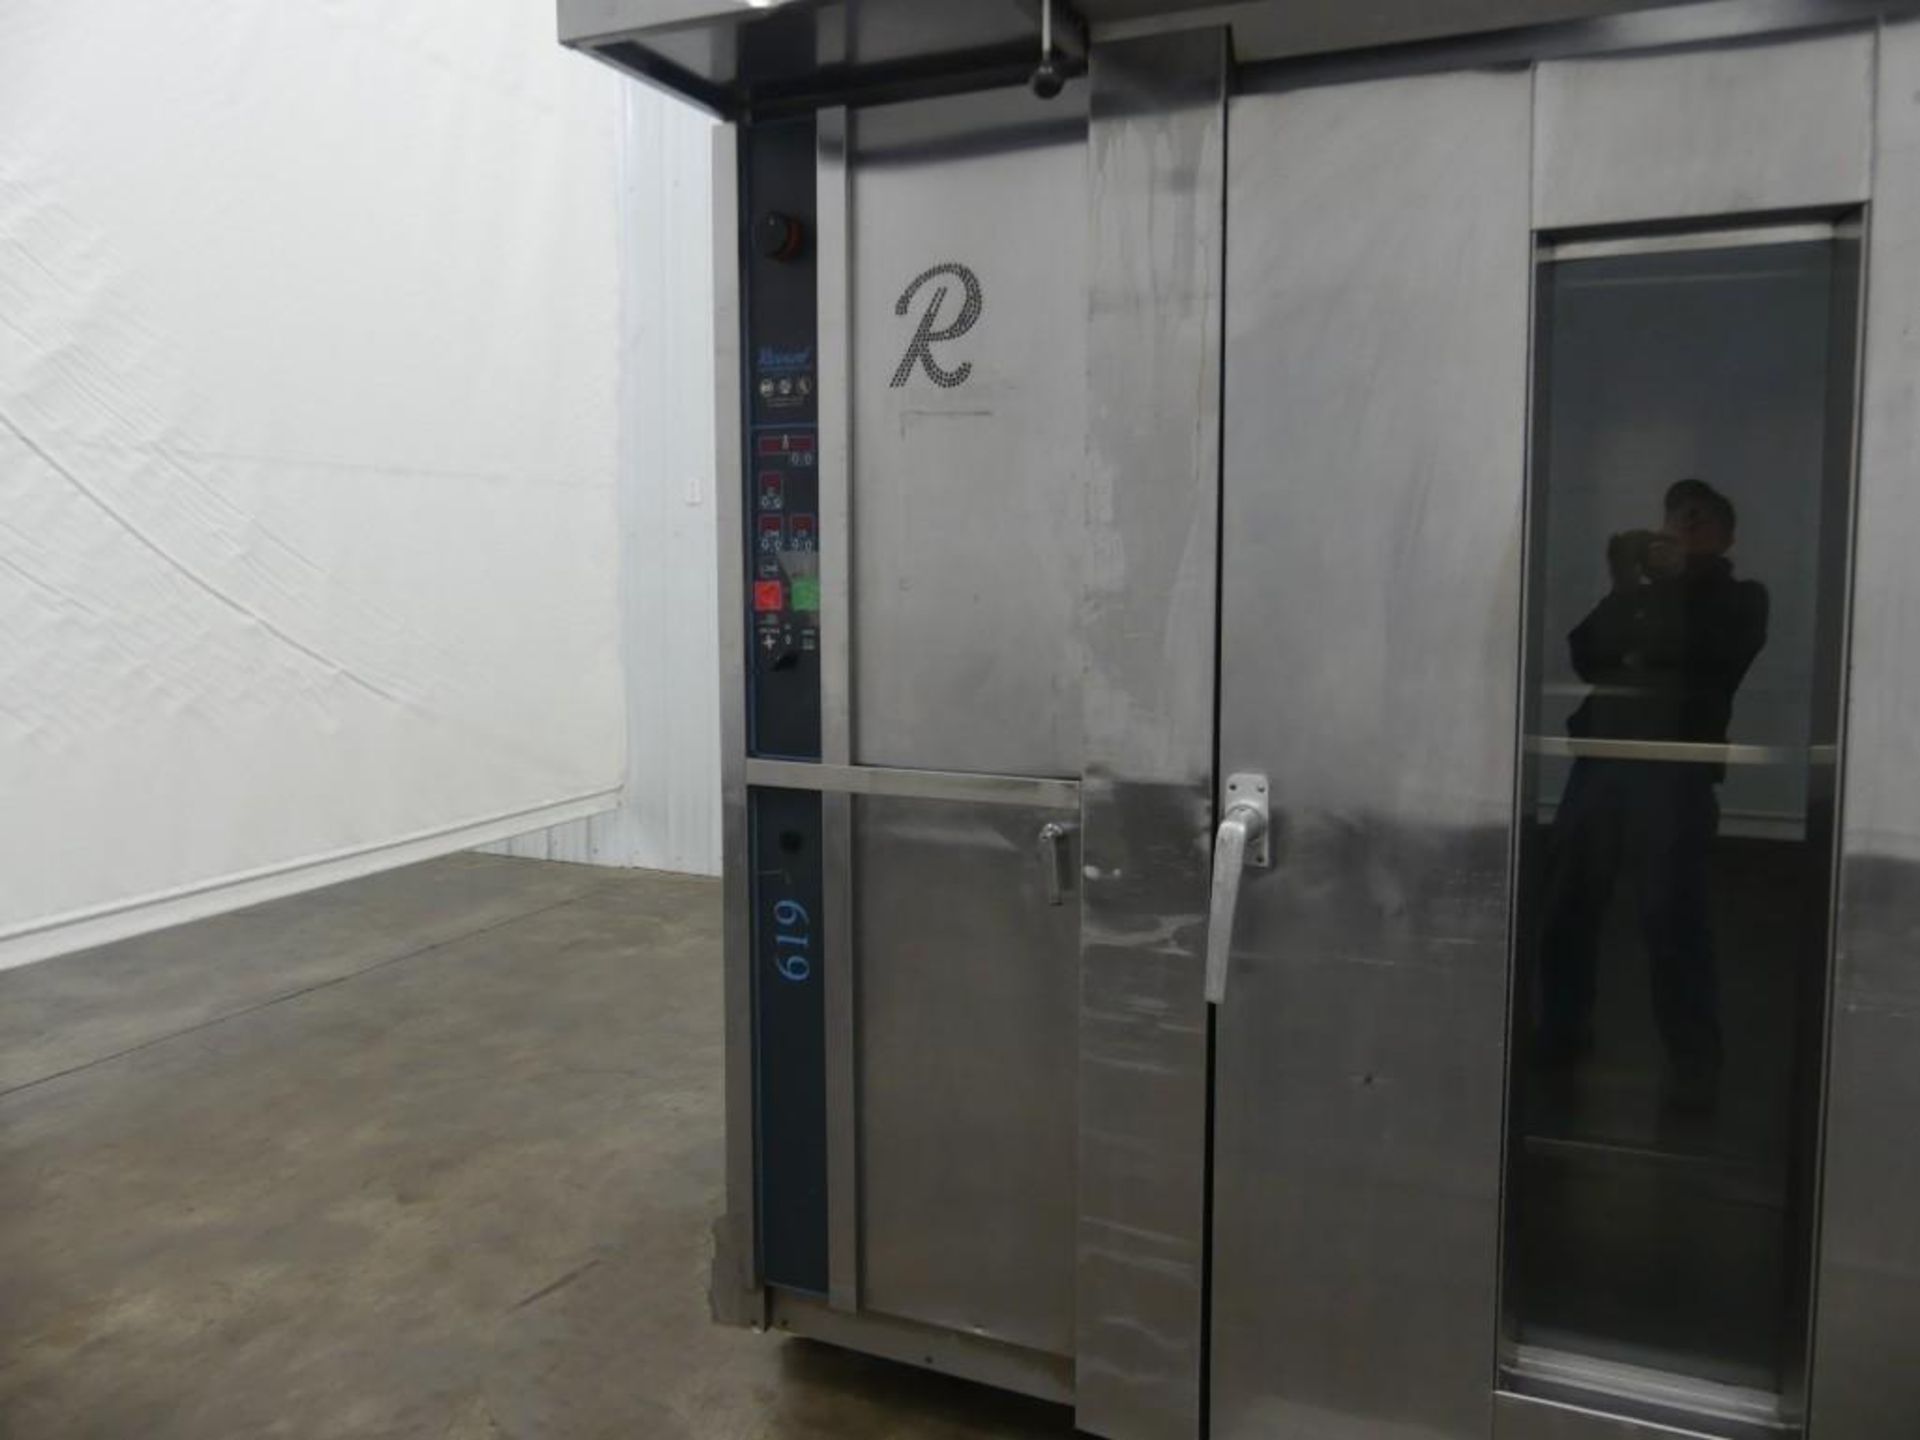 Revent 619 G DG 318,000 BTU Natural Gas-Fired Double Rack Oven - Image 18 of 28